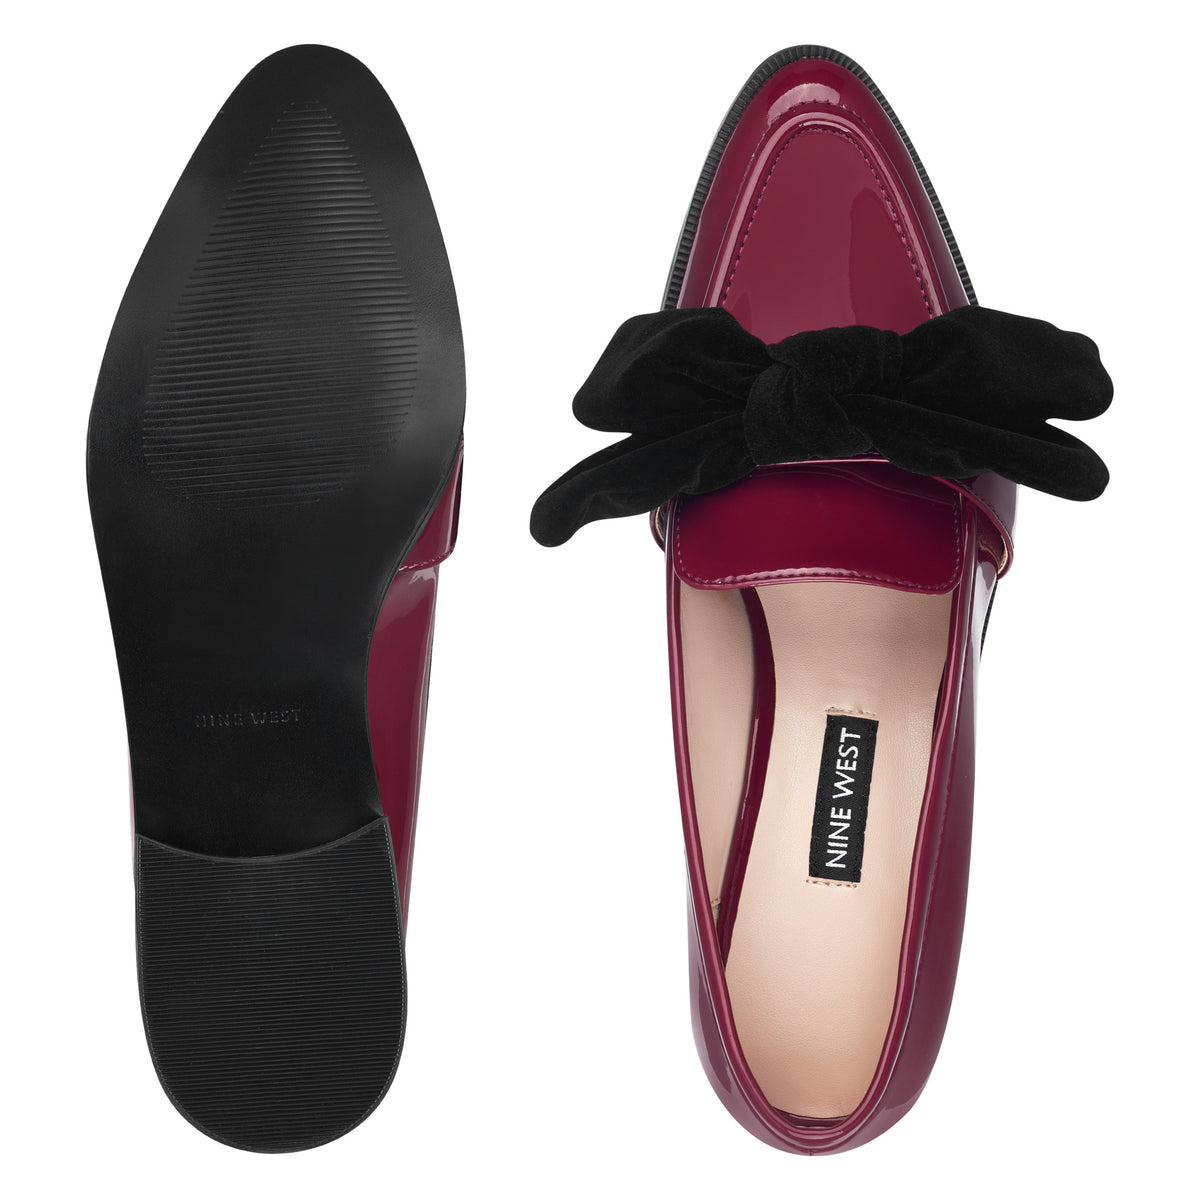 Weeping Bow Loafers - Nine West